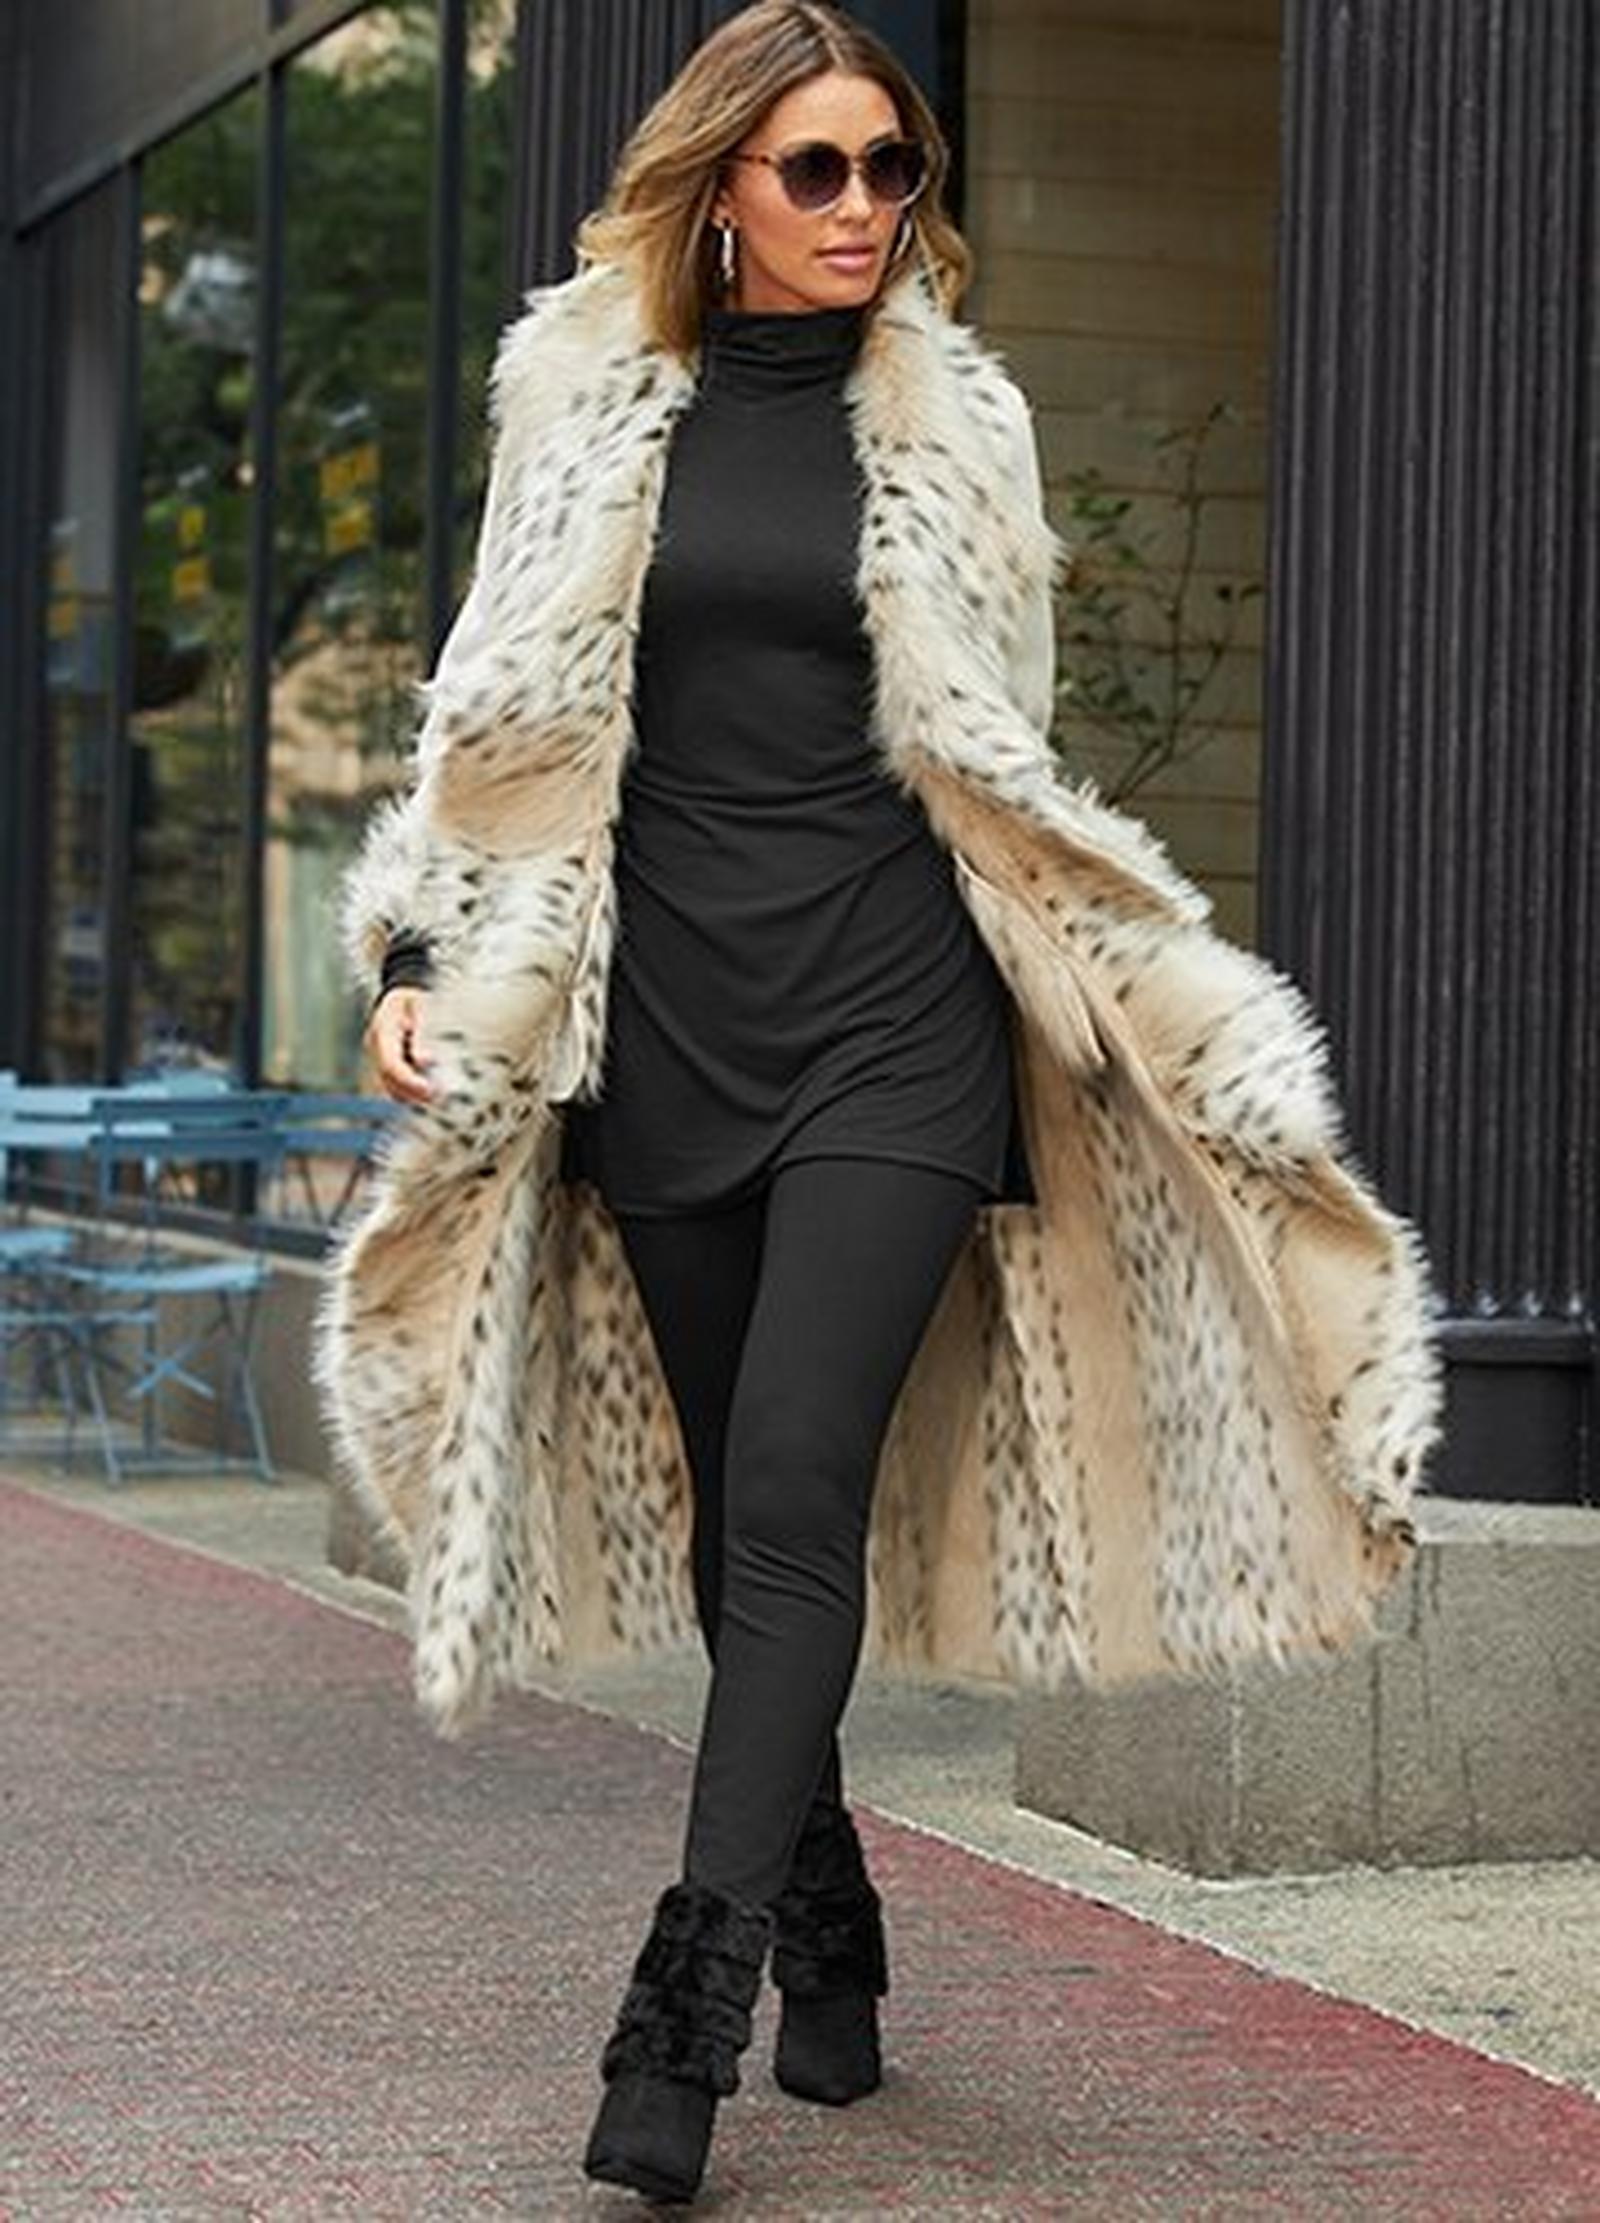 model wearing an off-white long coat with white leopard print faux-fur, black tunic top, black leggings, and black faux-fur booties.